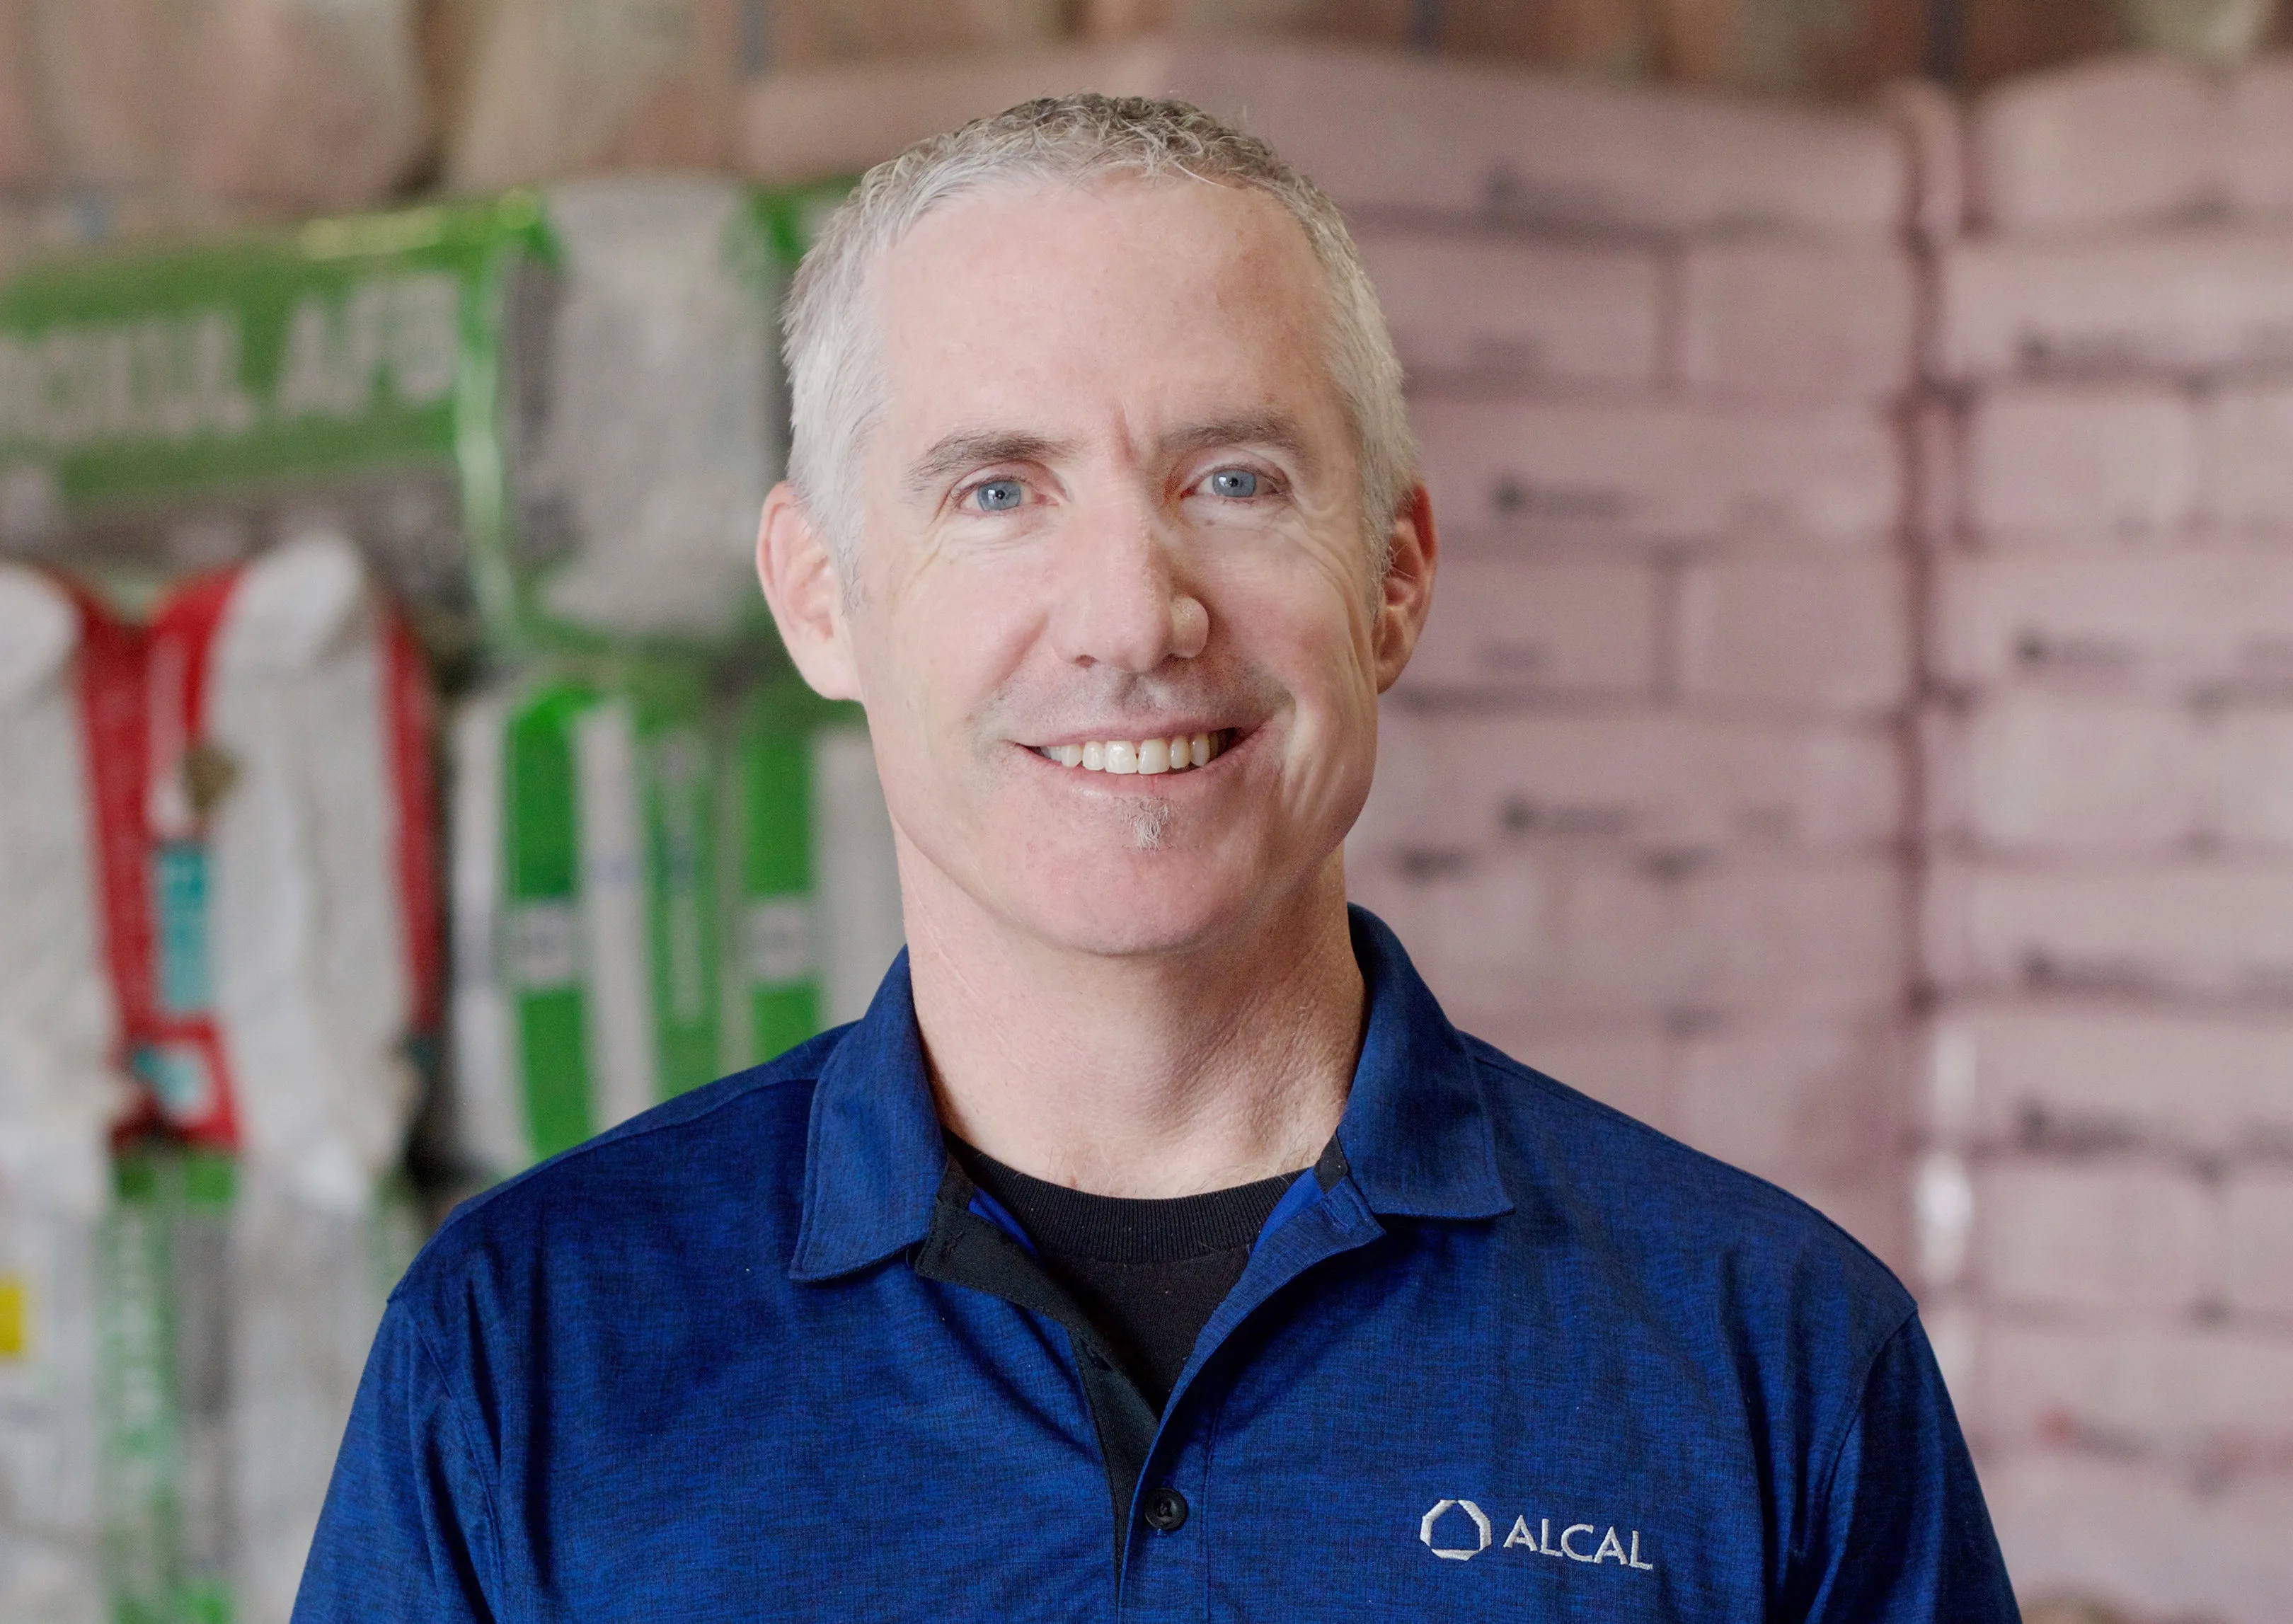 Greg Sutliff is home services division manager at Alcal Specialty Contracting, Inc., a Diamond Certified company. He can be reached at (877) 312-3532 or by email.